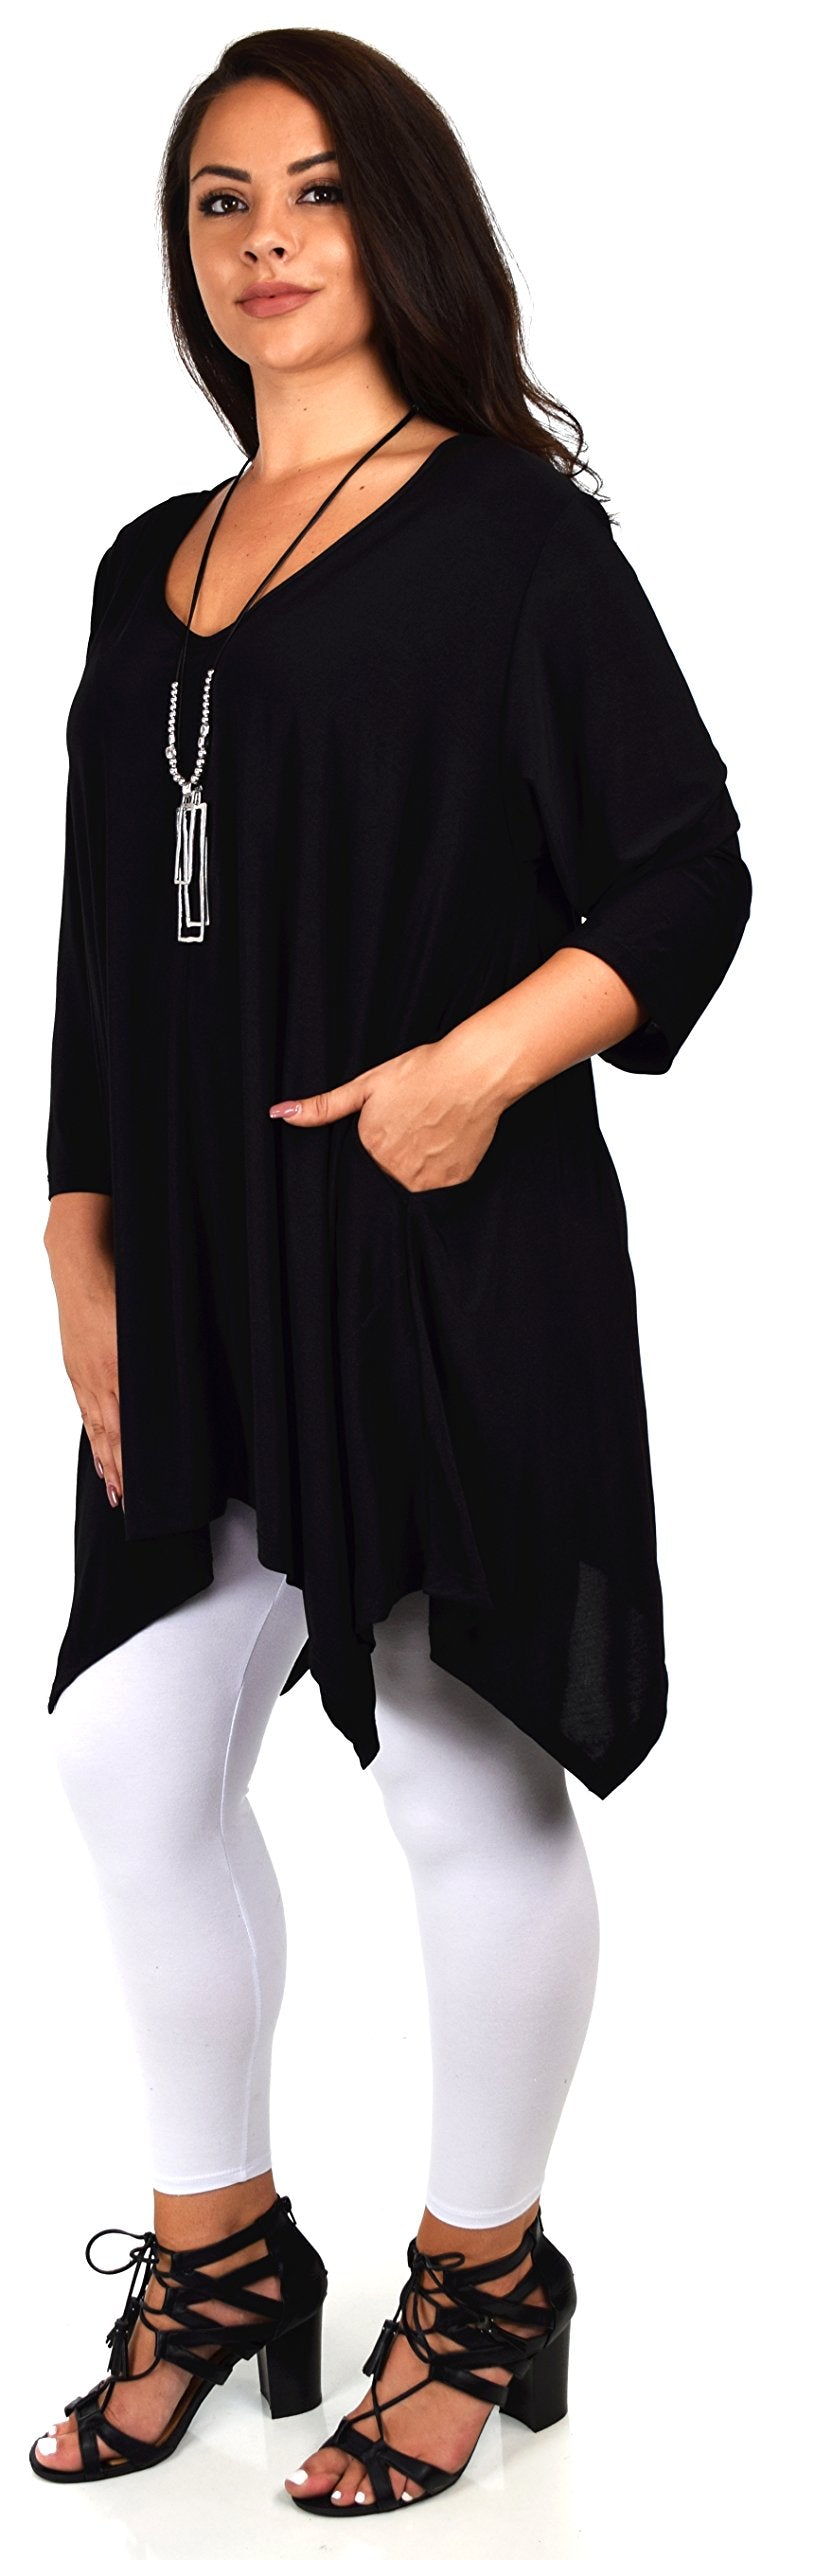 Comfyplus Tunic, Versatile and Oversize Tunic, lagen look Tunic,  Plus size tunic with side pockets. Fits 1XL/2XL/3XL